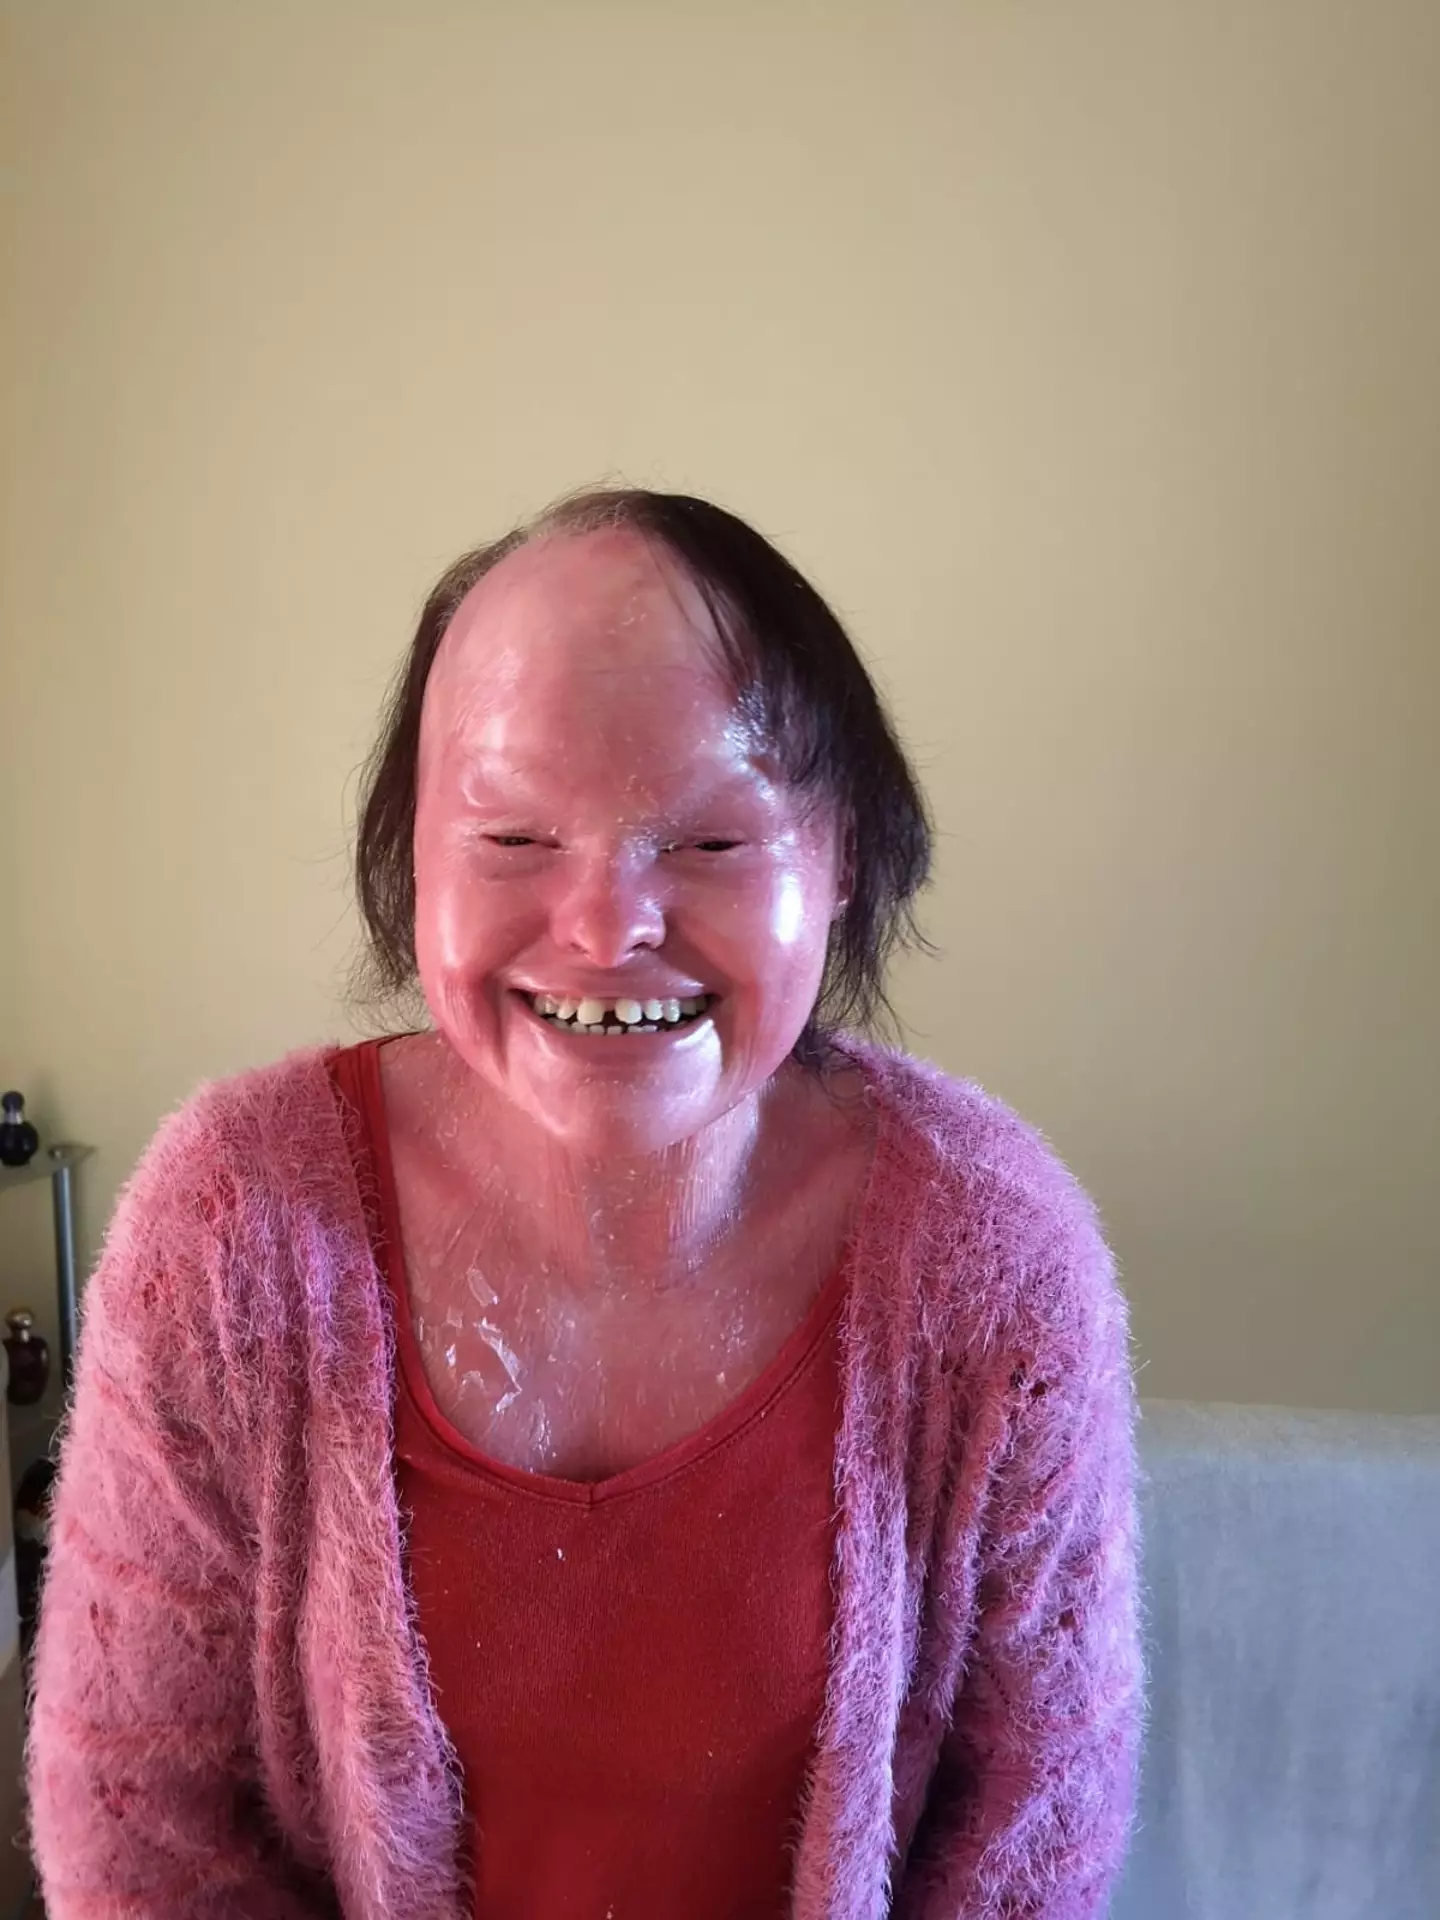 Hannah Betts, who had rare genetic condition Harlequin ichthyosis, has passed away at the age of 32.